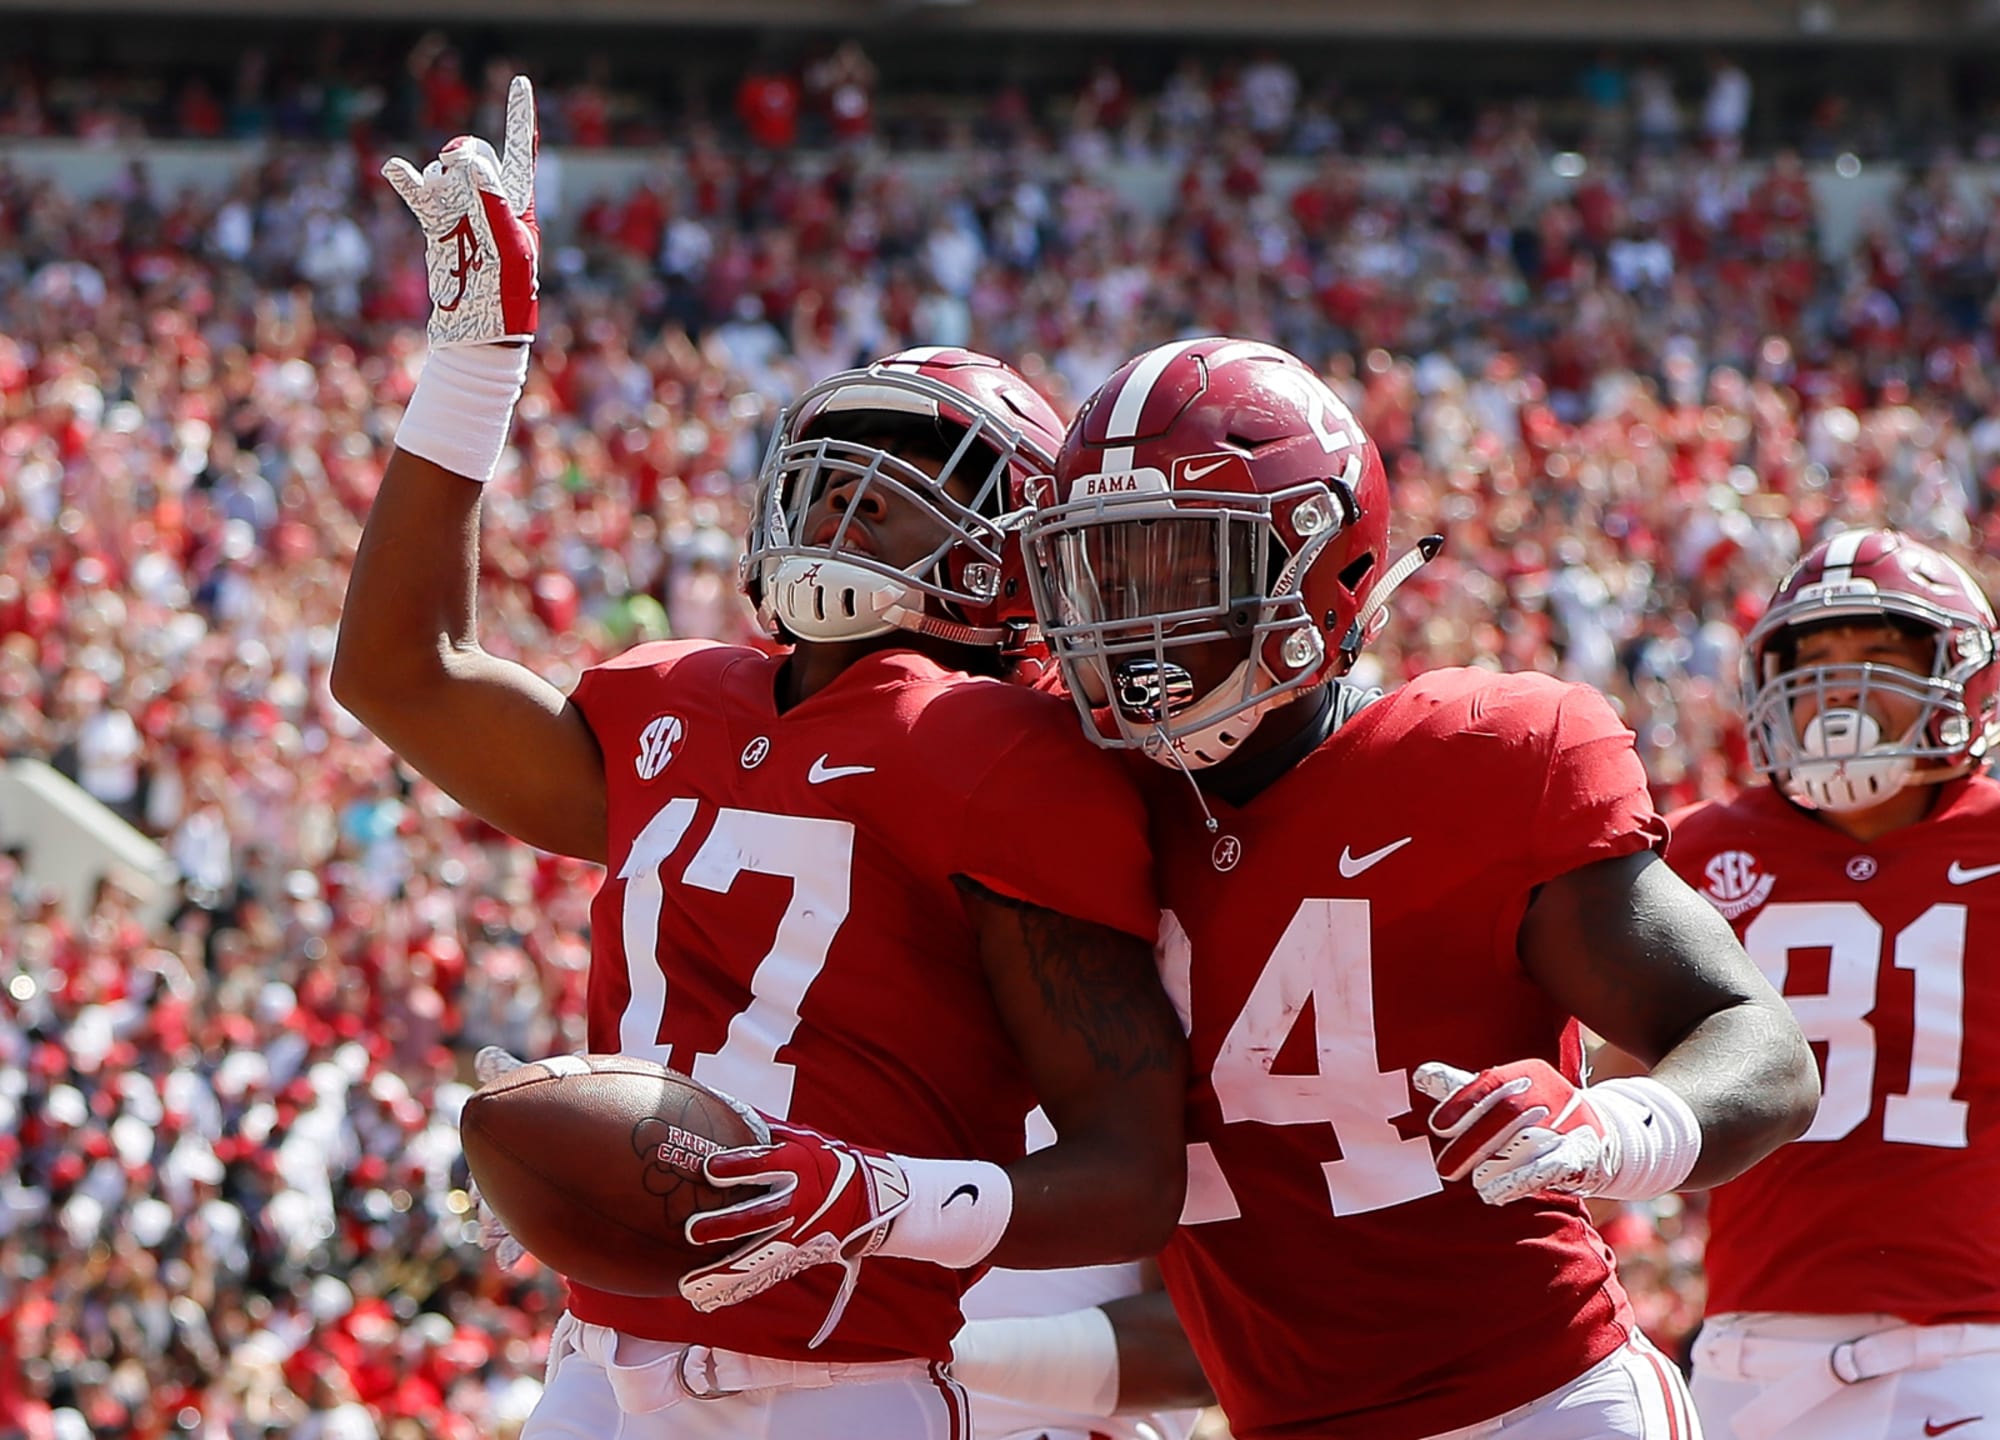 Alabama Football: The gap between the Crimson Tide and everybody else